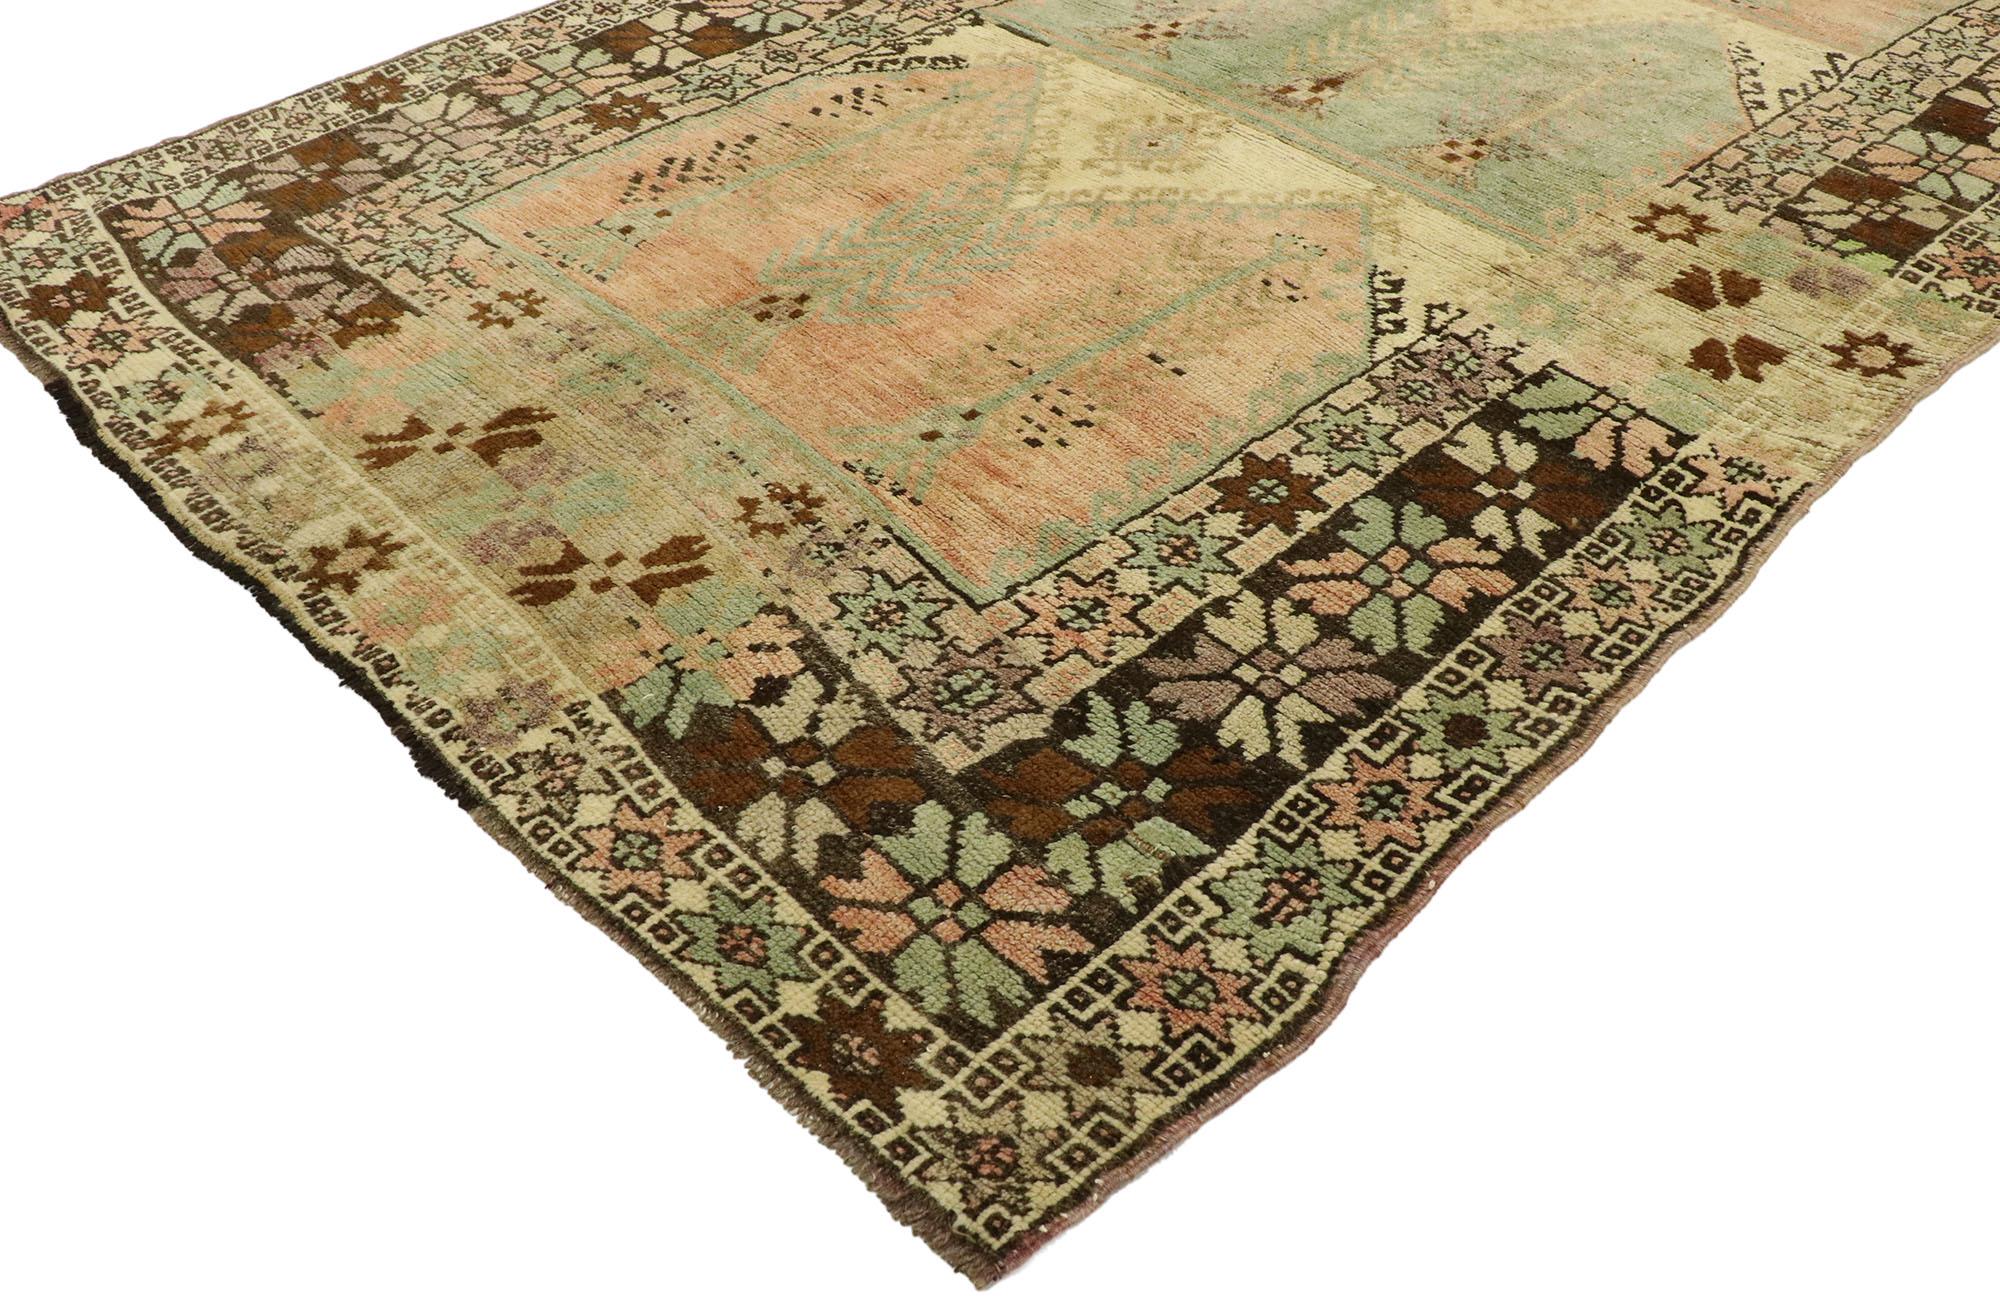 53100, vintage Turkish Prayer Saph rug with Mid-Century Modern style. Time-softened colors and Mid-Century Modern style collide in this hand knotted vintage Anatolian Saph rug. The Directional Turkish prayer rug beautifully displays alternating